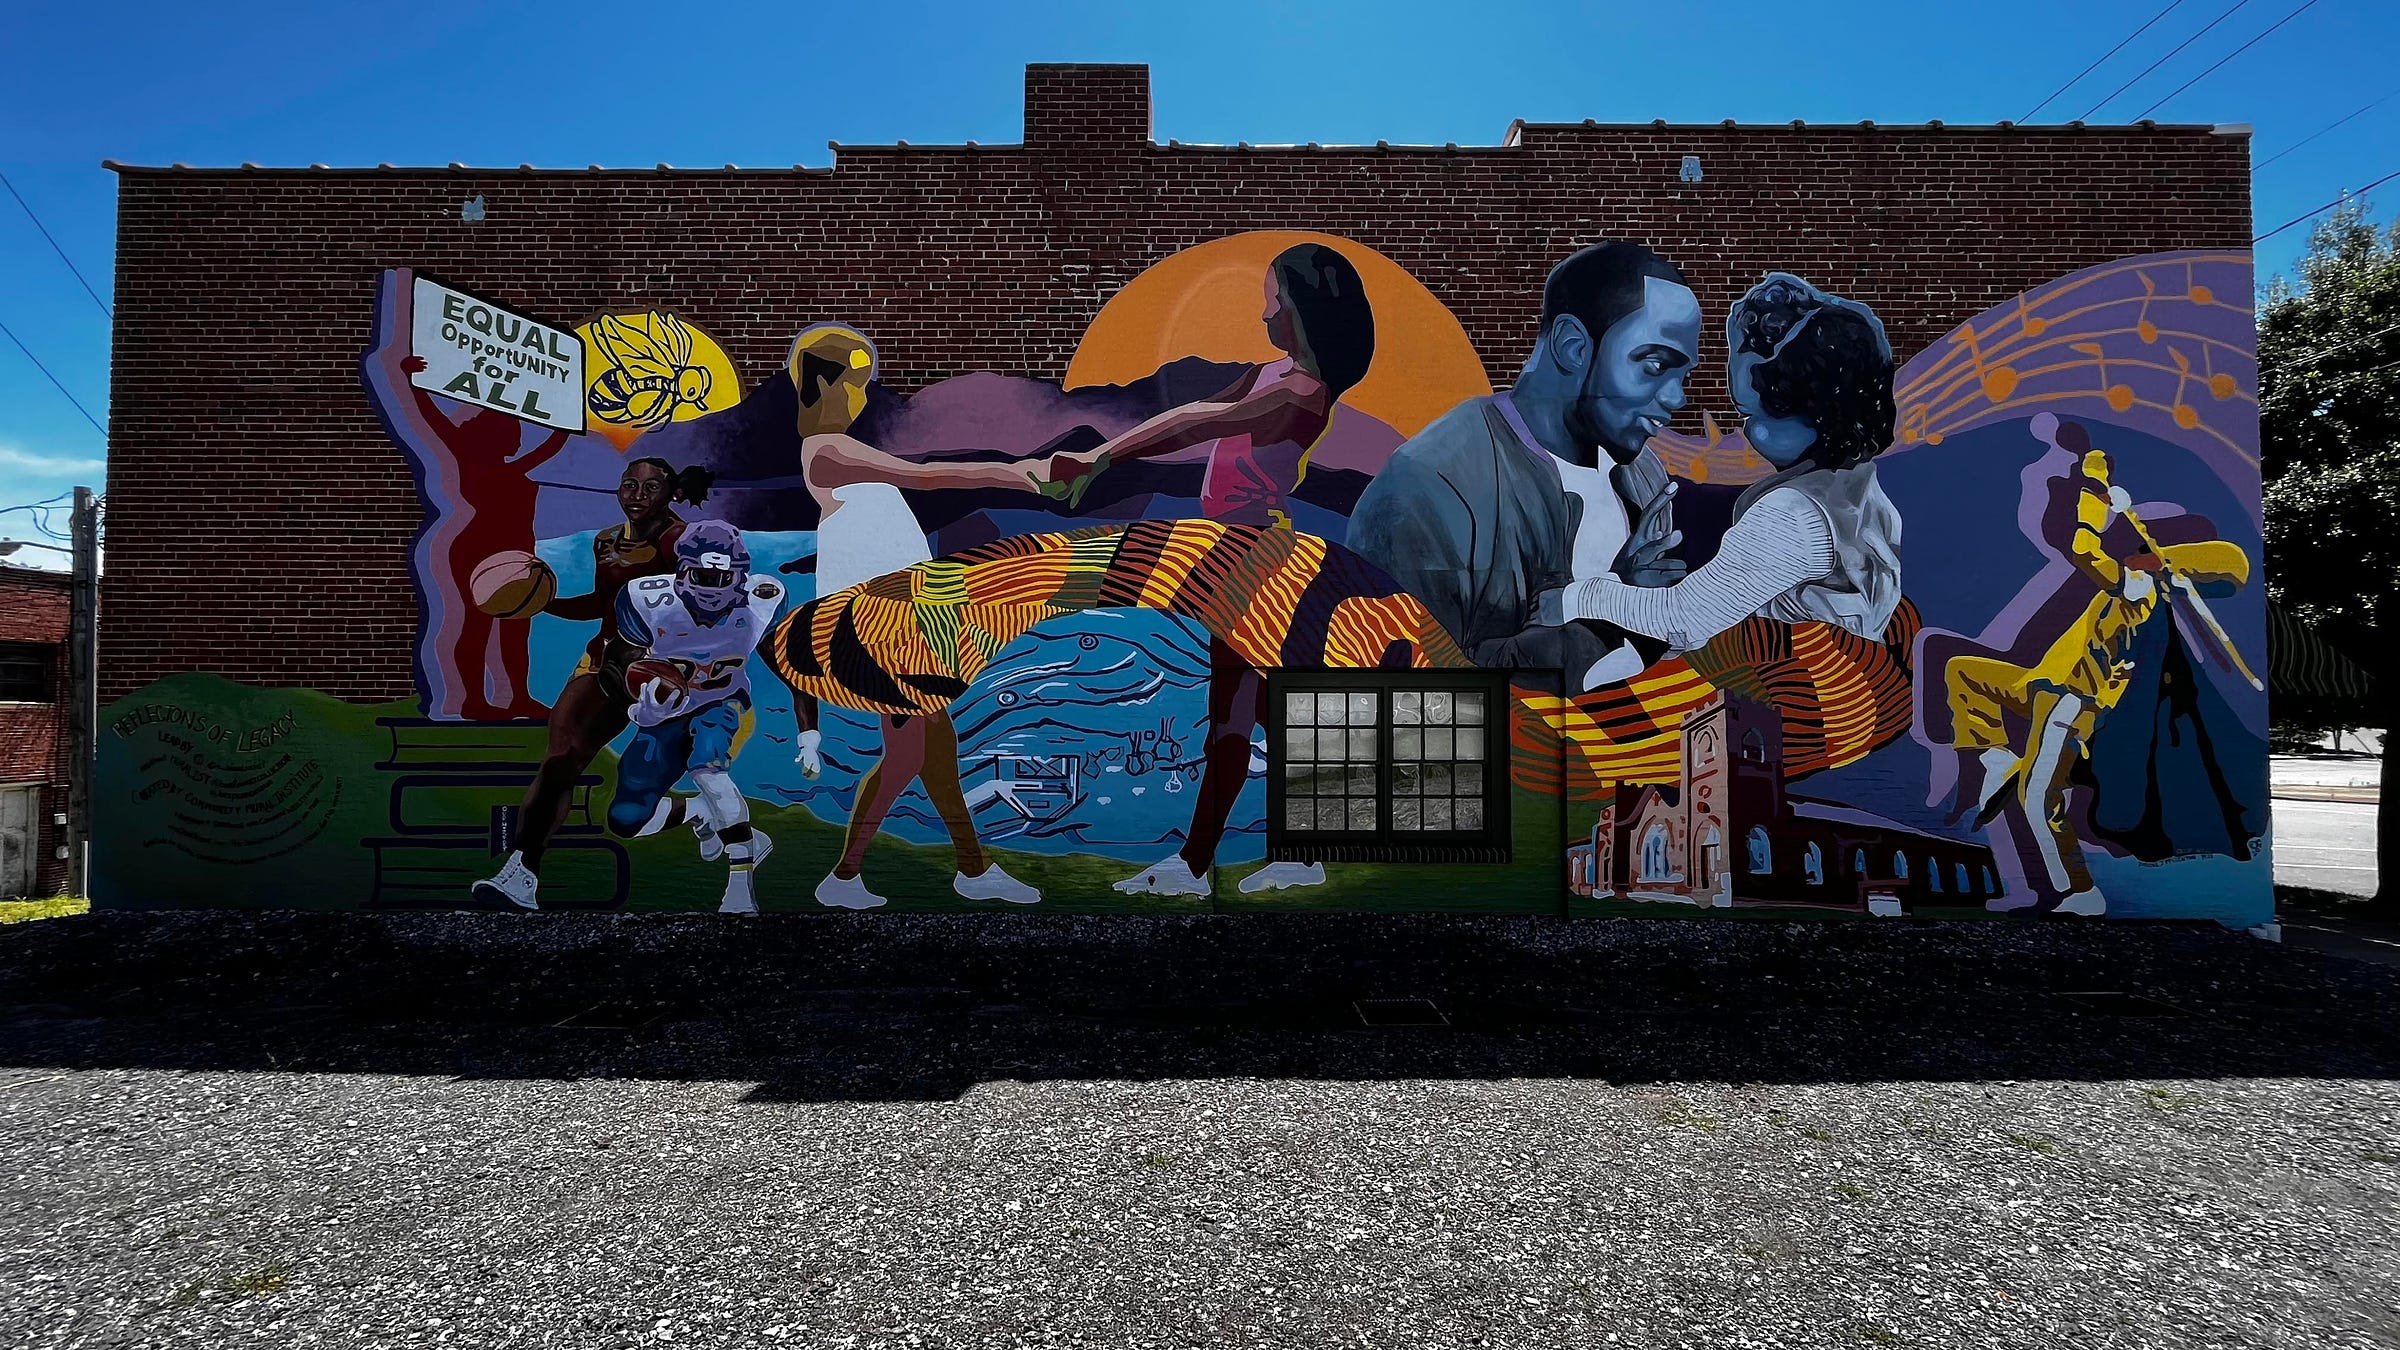 Image of a mural featuring several figures with dark skin tones playing sports, dancing, protesting for equal rights, and playing musical instruments.